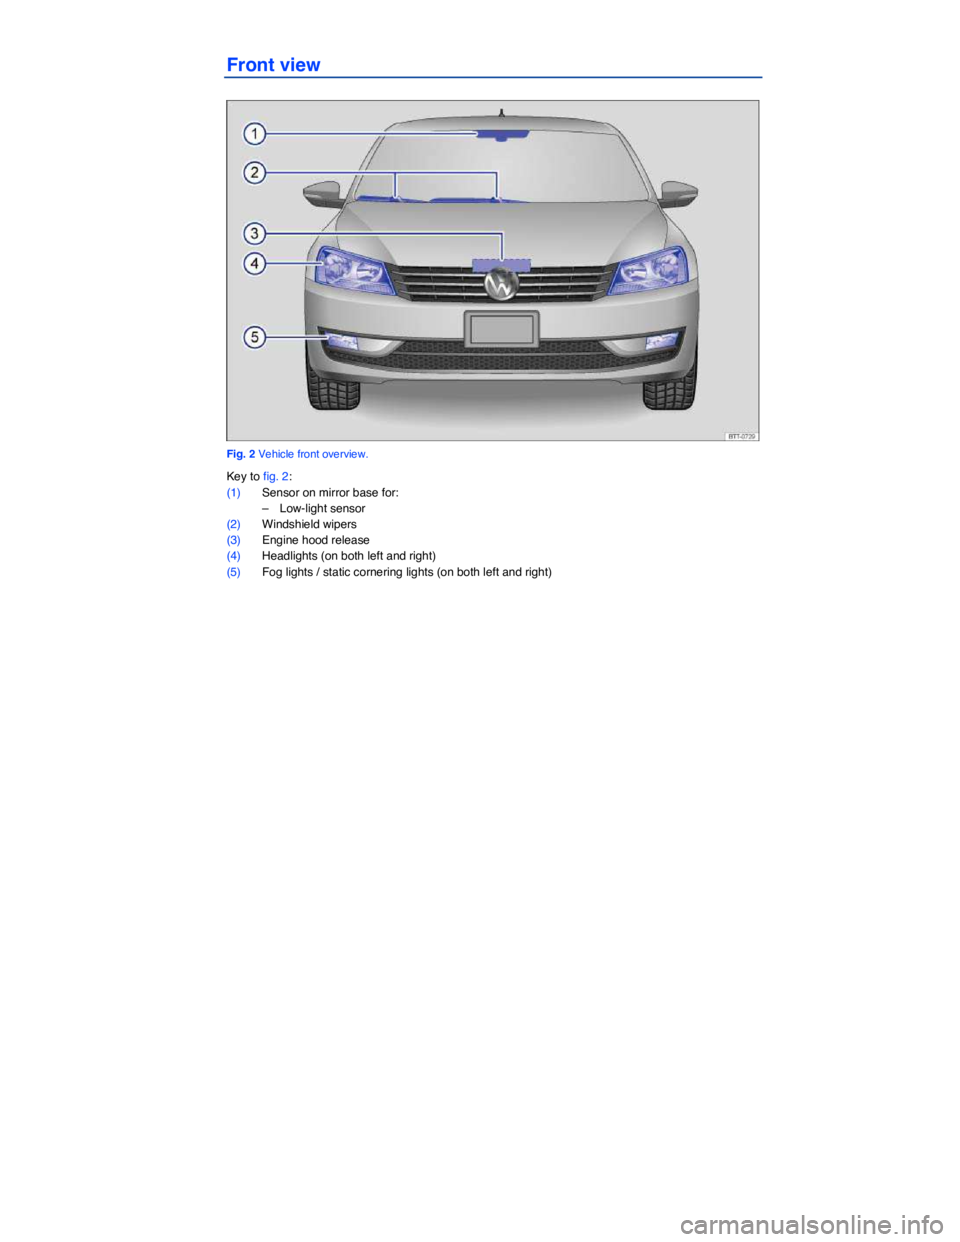 VOLKSWAGEN PASSAT 2011  Owners Manual  
Front view 
 
Fig. 2 Vehicle front overview. 
Key to fig. 2: 
(1) Sensor on mirror base for: 
–  Low-light sensor  
(2) Windshield wipers  
(3) Engine hood release  
(4) Headlights (on both left a